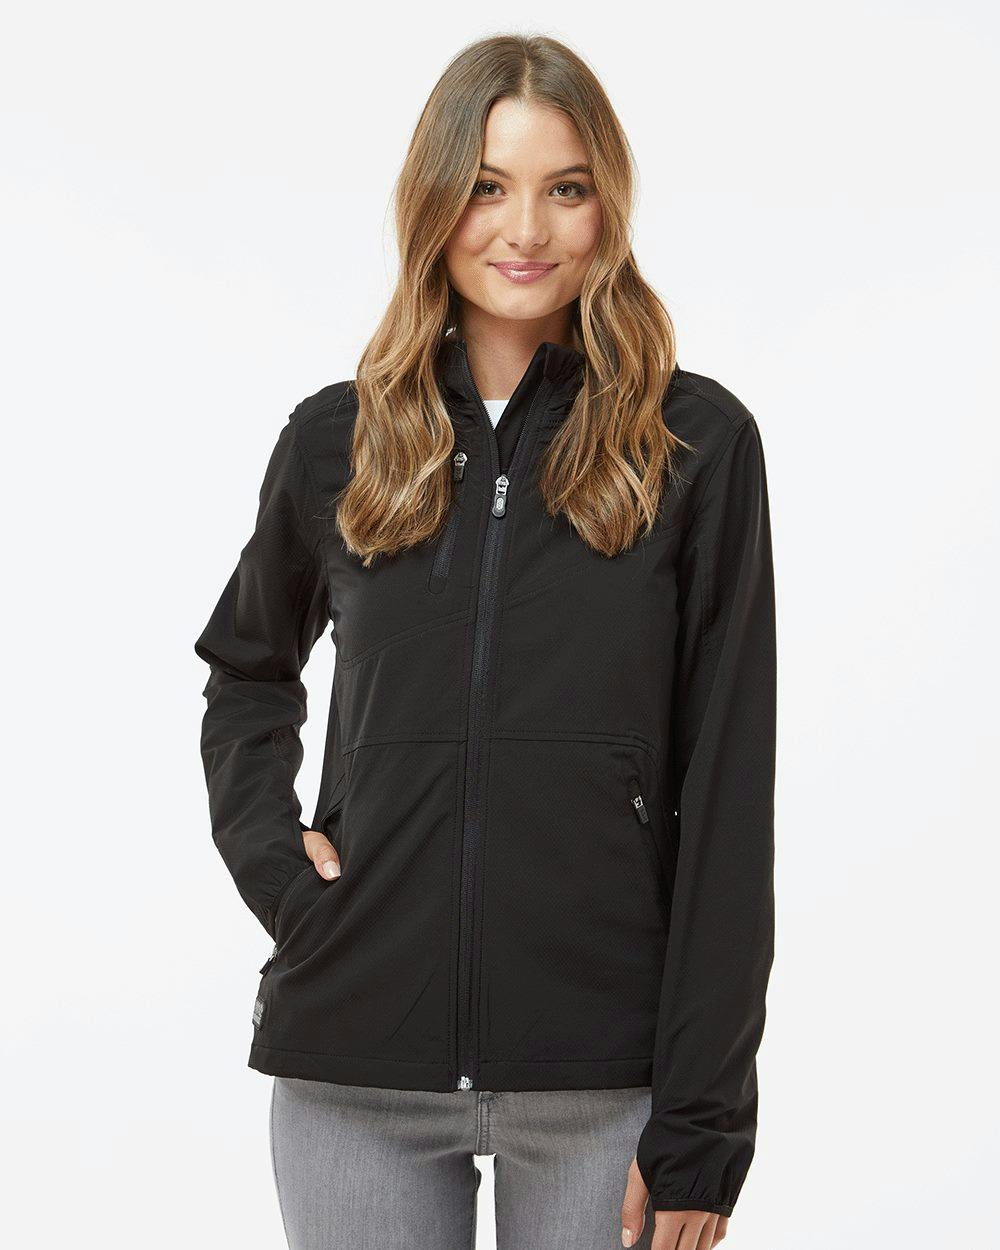 Image for Women's Ascent Soft Shell Hooded Jacket - 9411